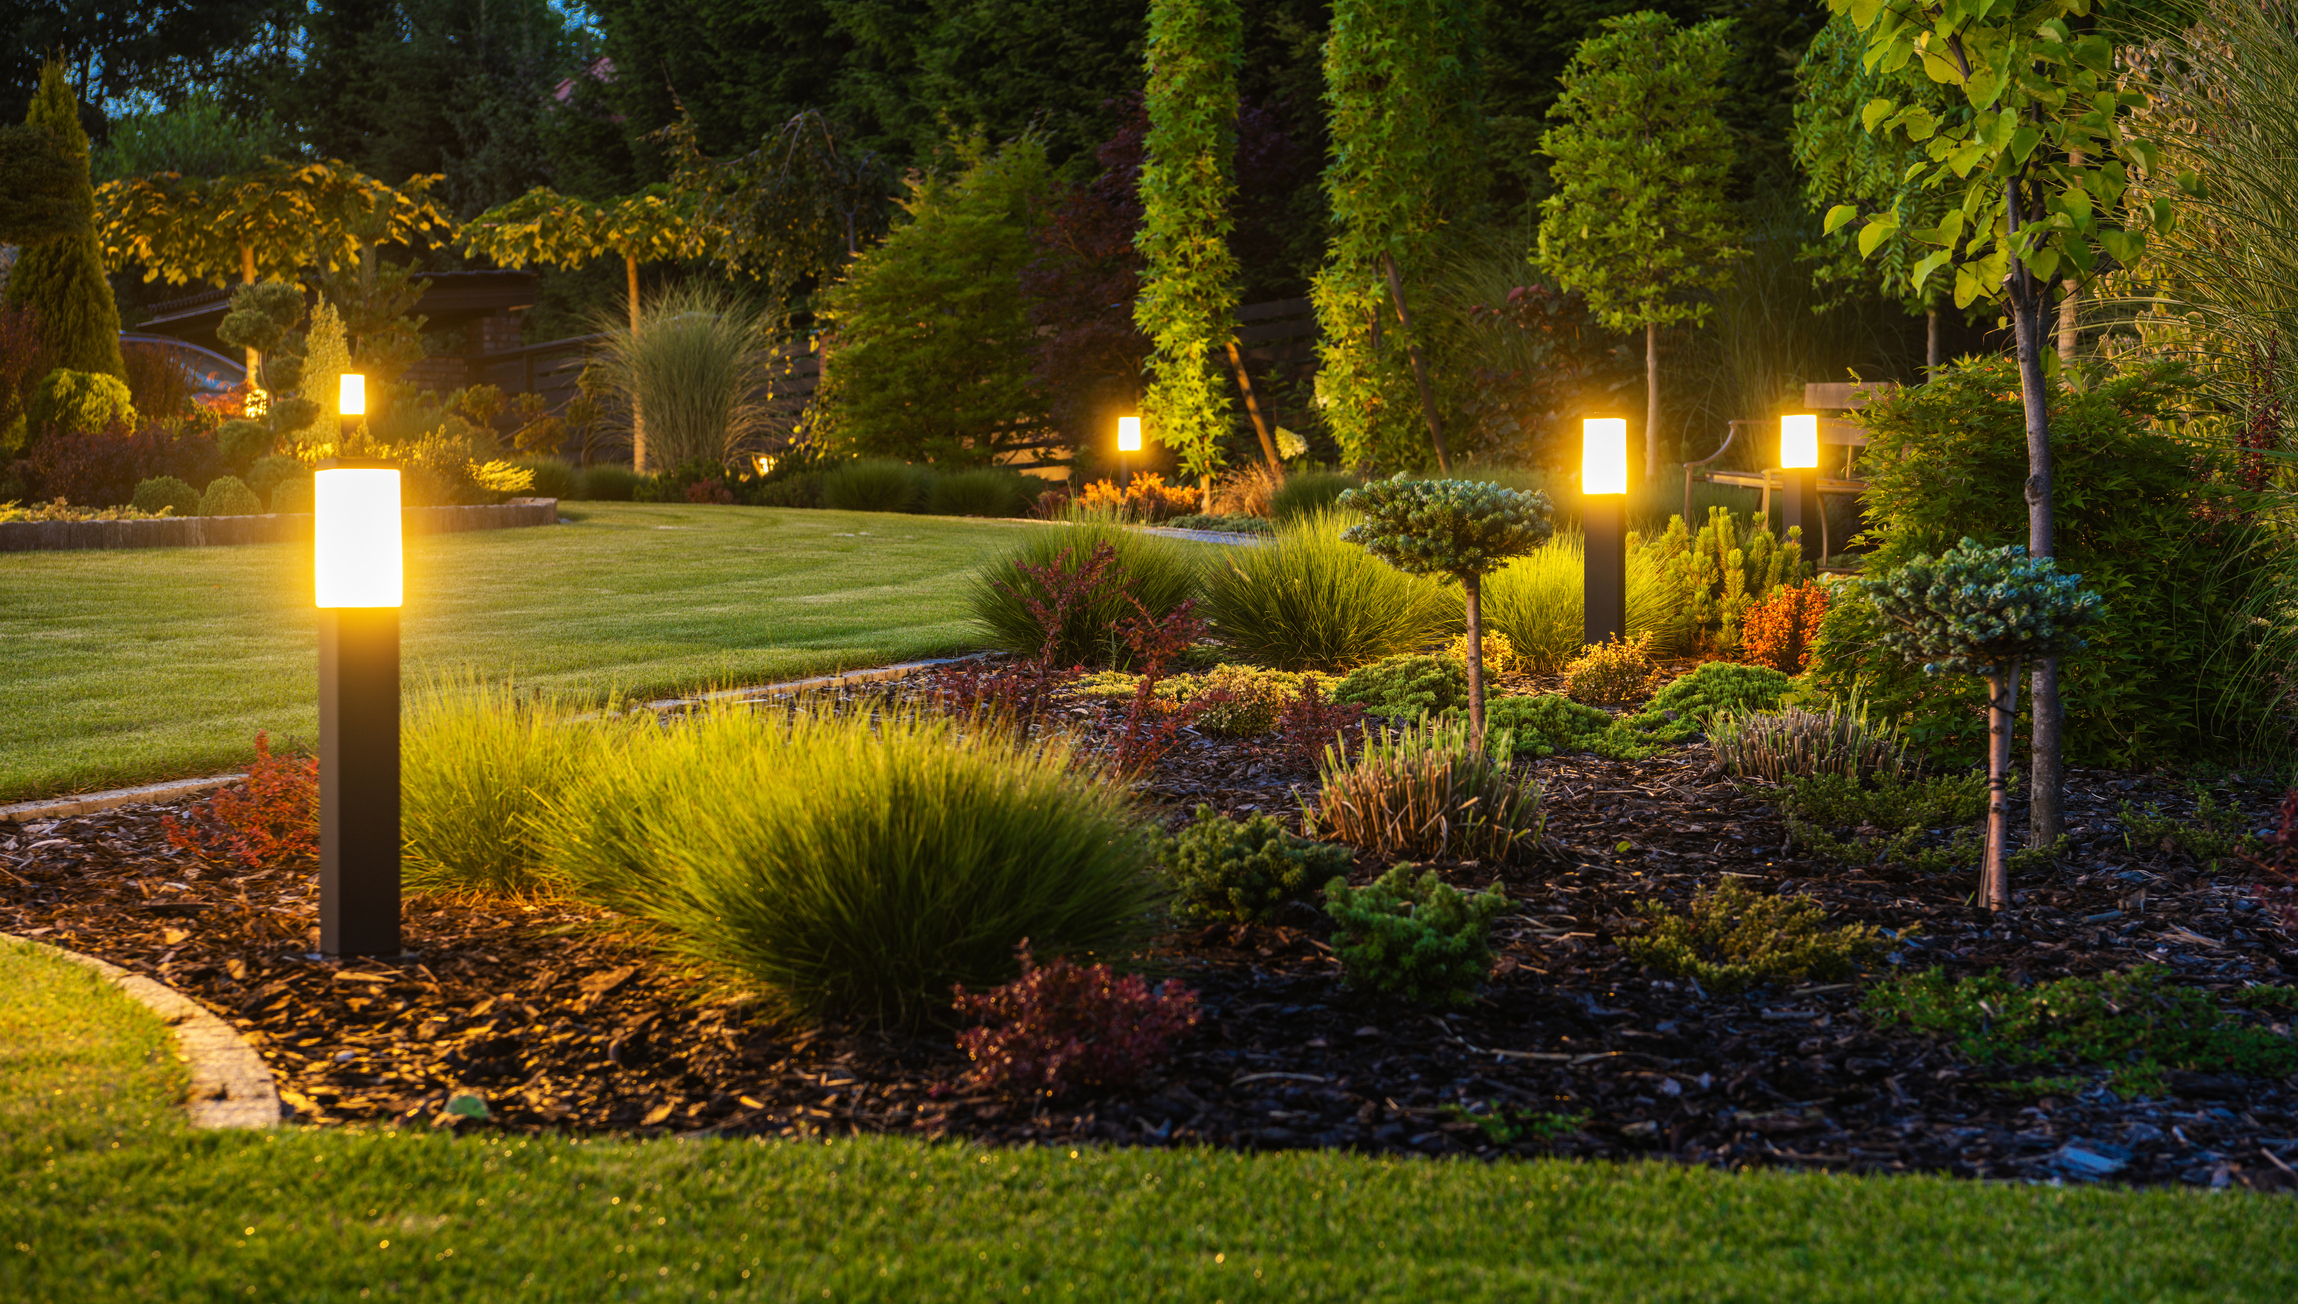 Are there benefits to adding outdoor lighting?